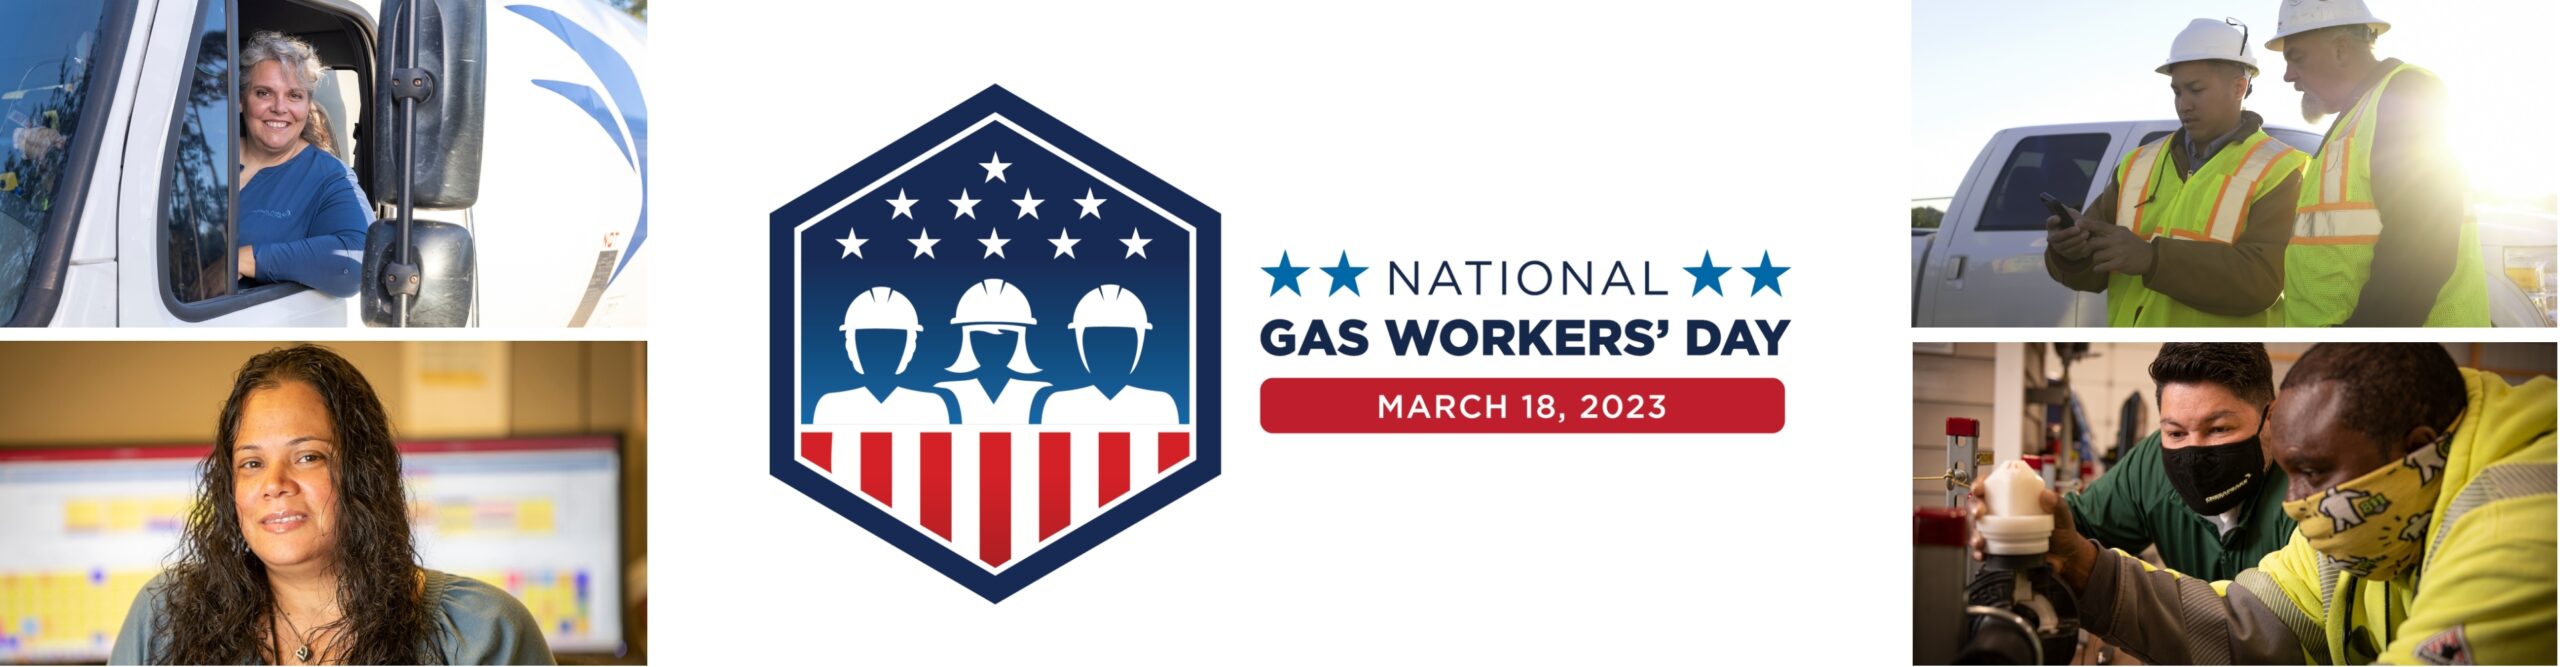 National Gas Workers Day